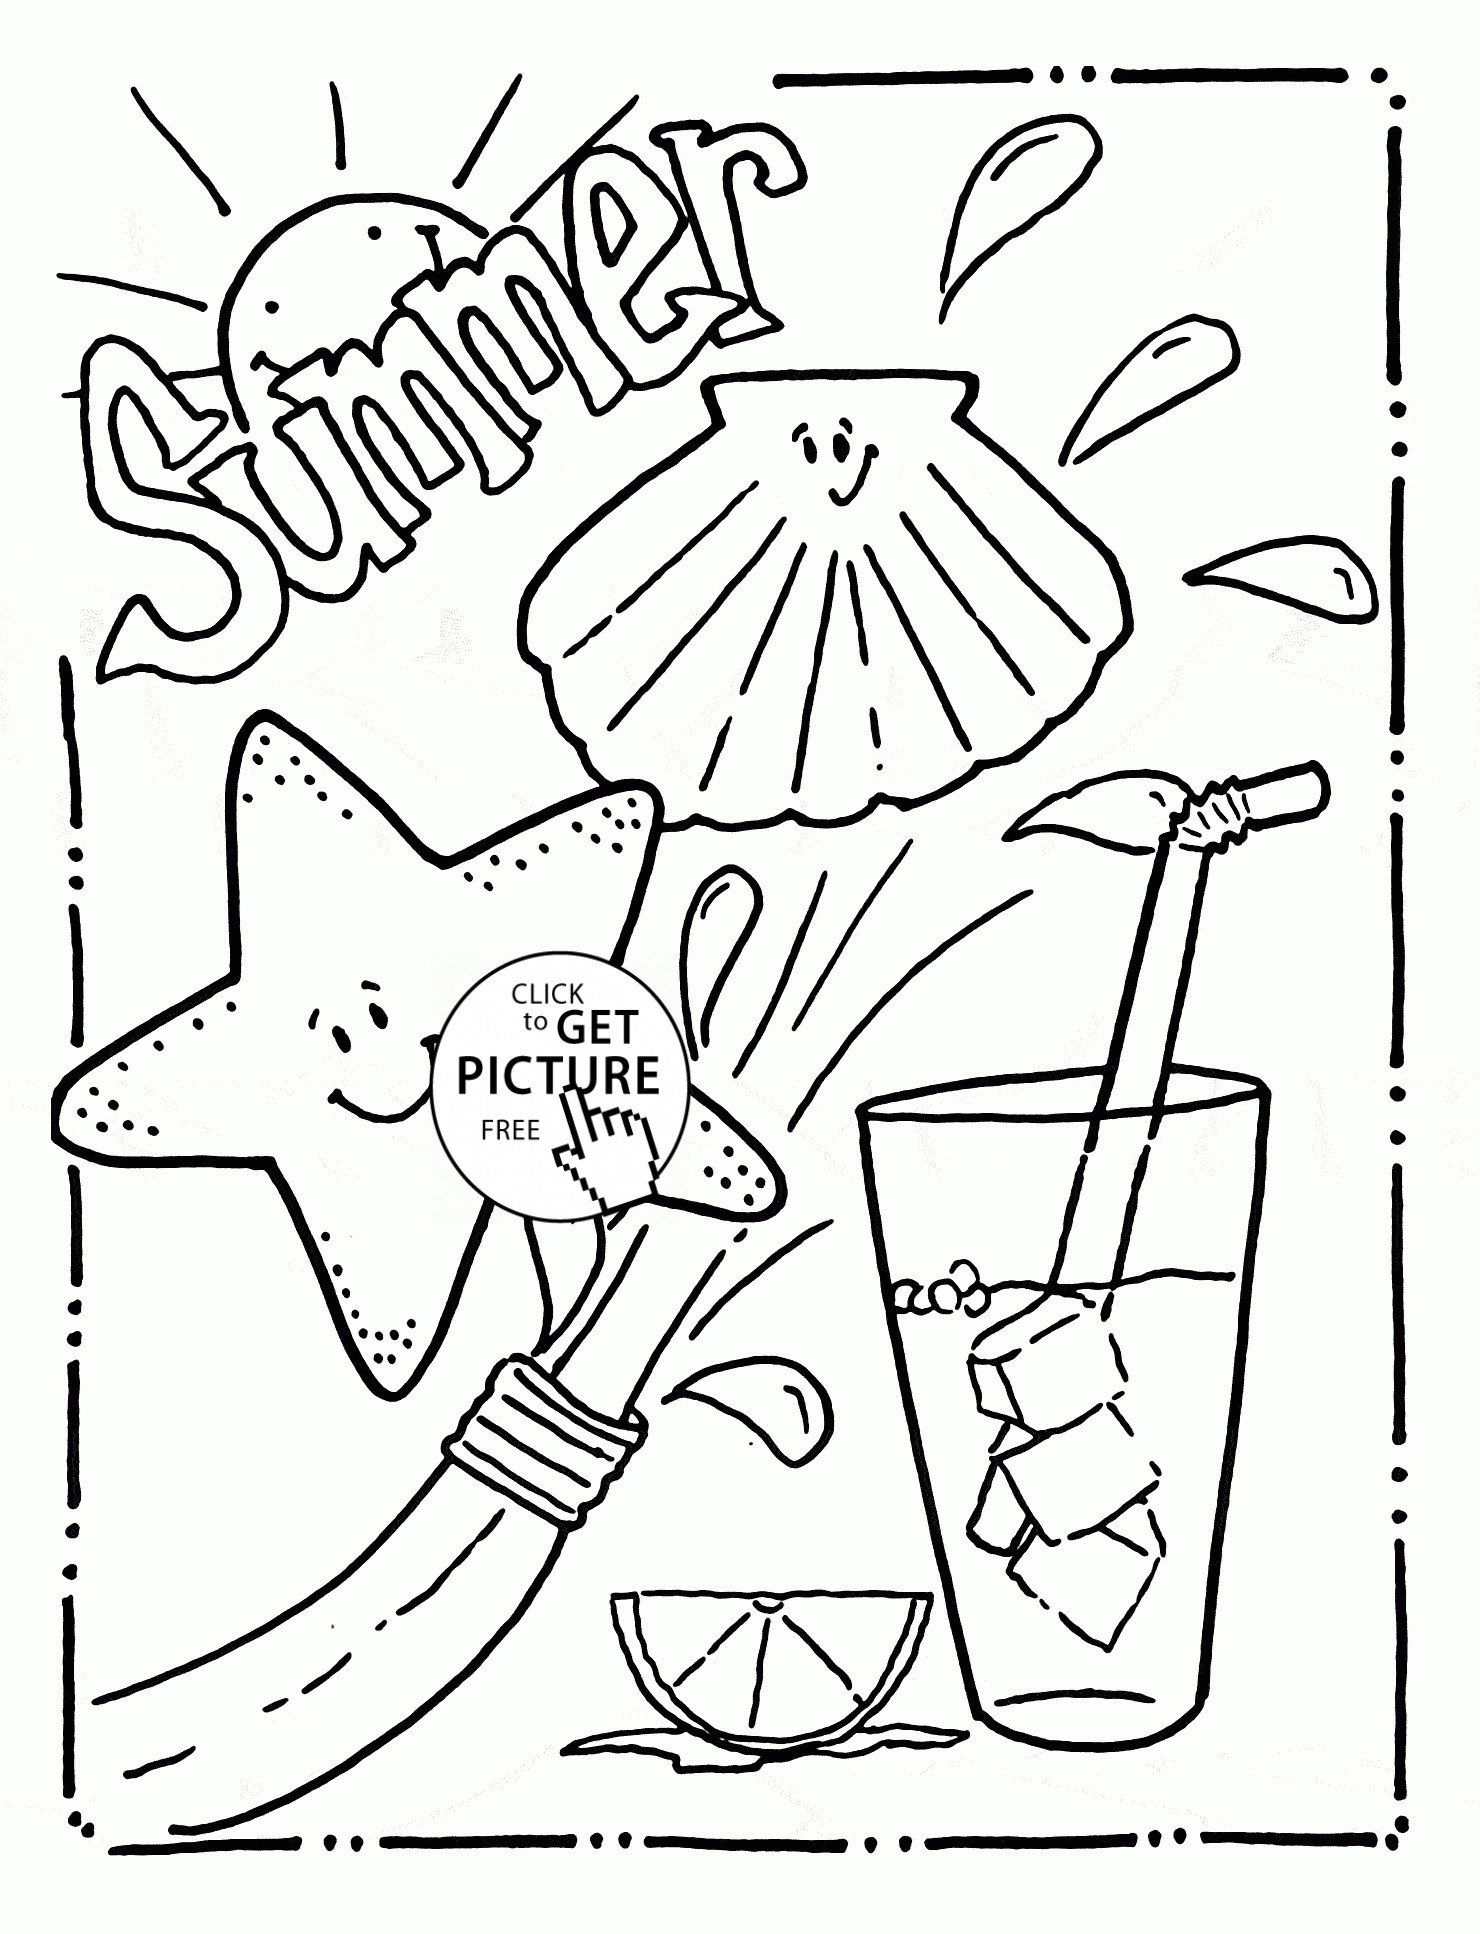 Printable Childrens Coloring Pages
 Summer Fun Printable Coloring Pages Coloring Home